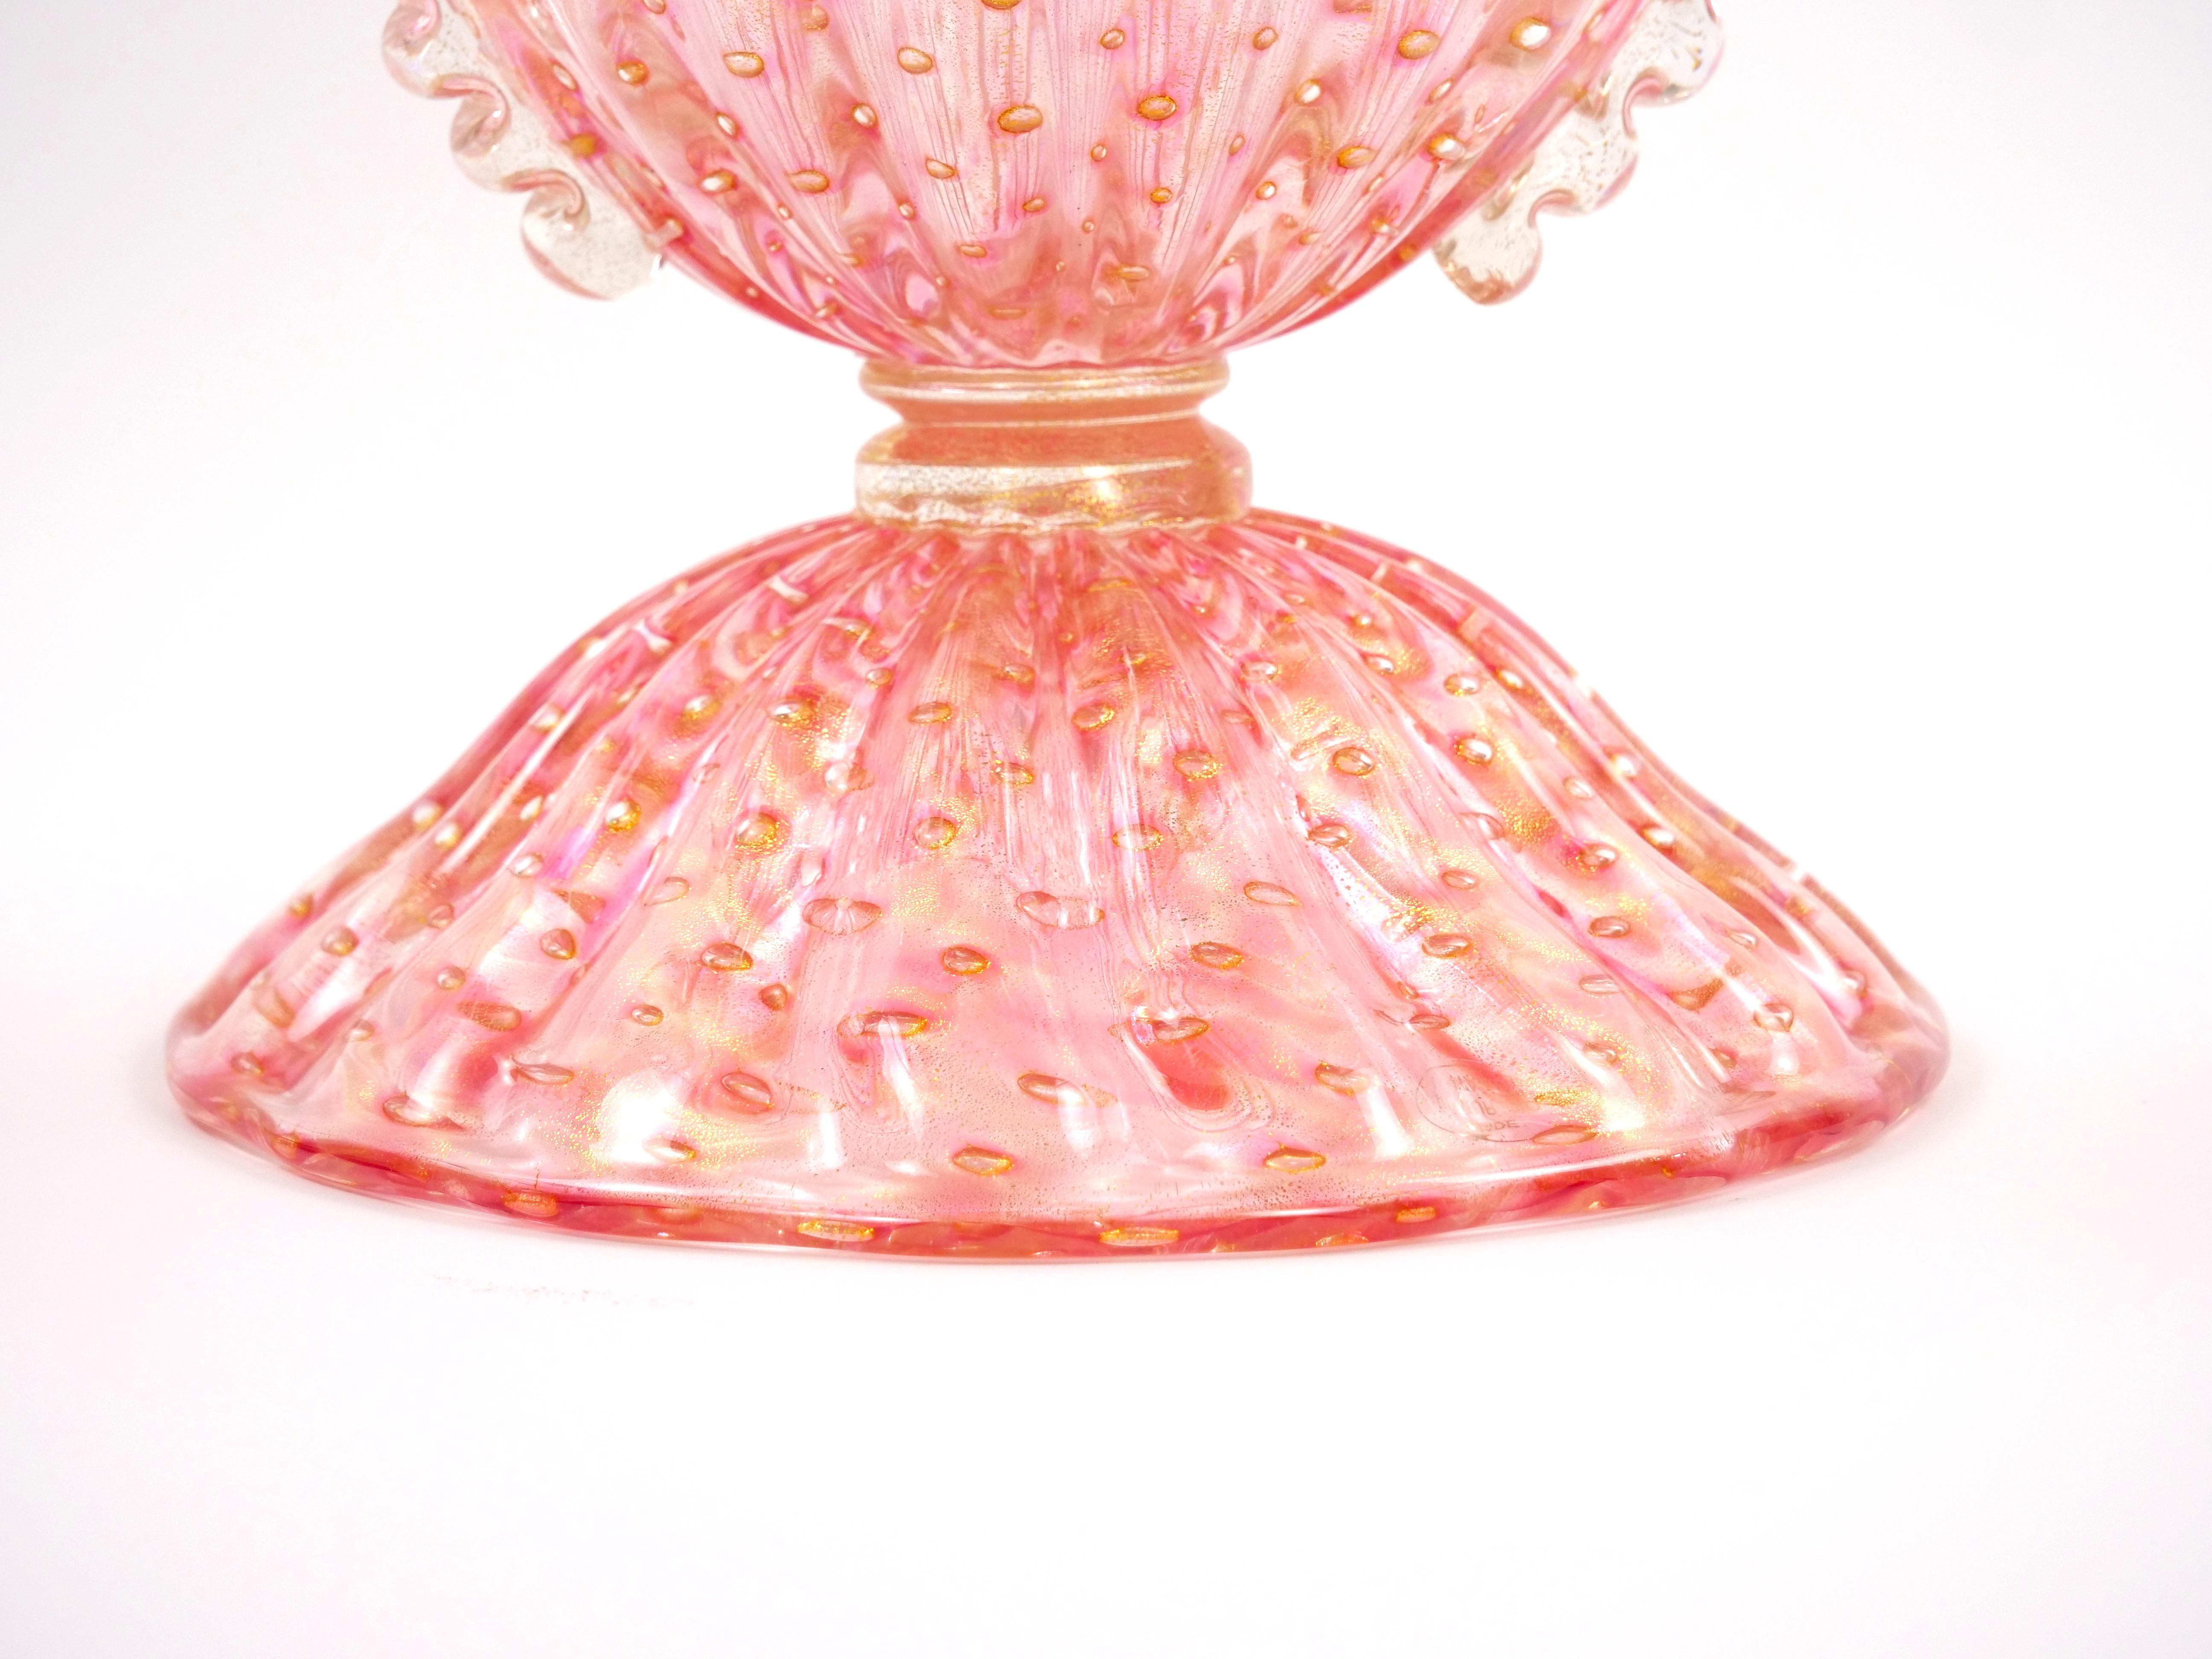 Art Glass Murano Bullicante / Gold Infused Rose Colored Glass Tableware Centerpiece Bowl For Sale